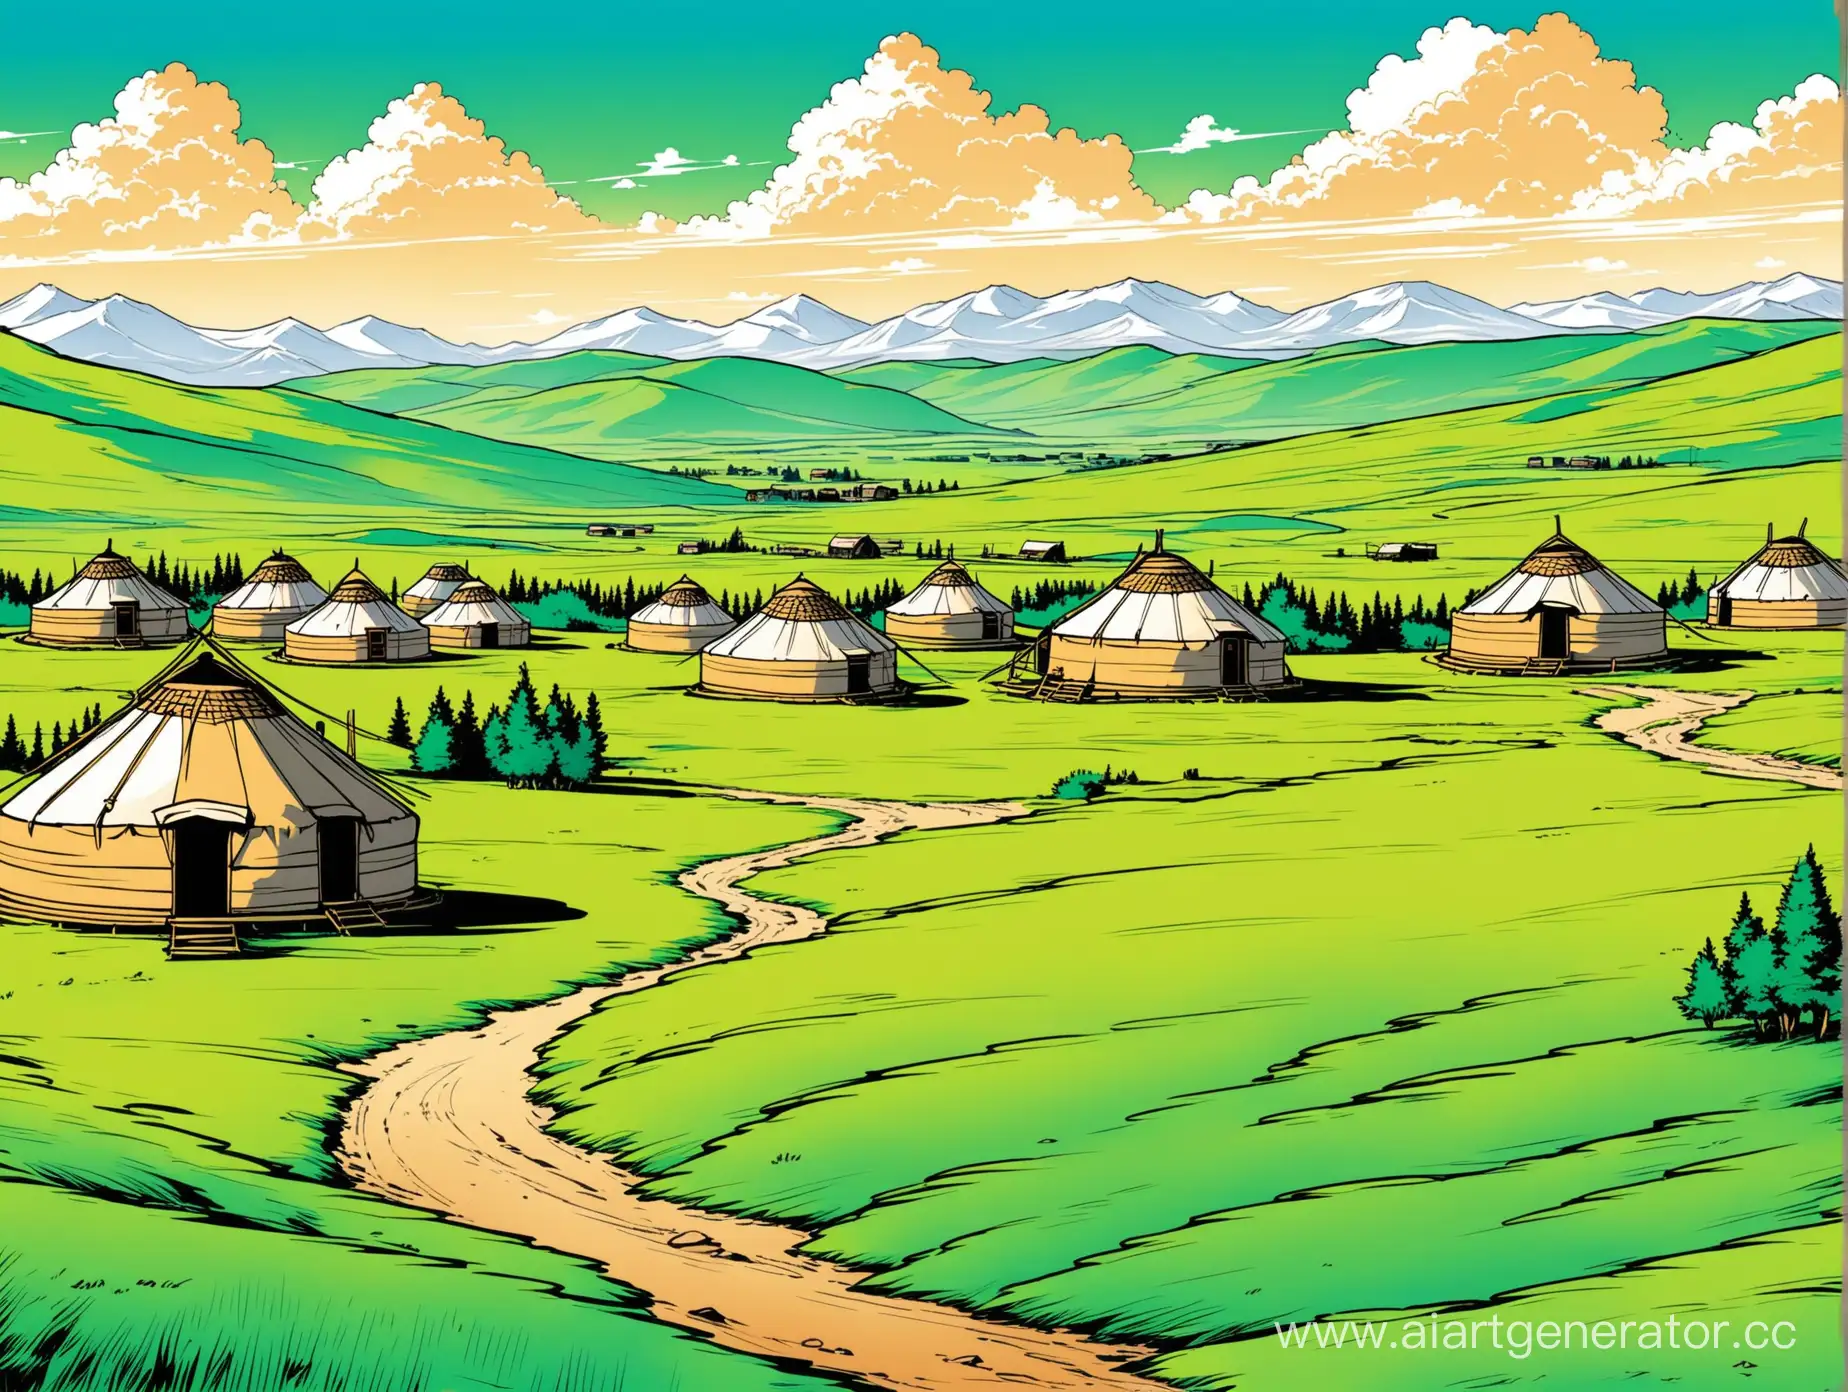 Nomadic-Kazakh-Village-in-Green-Steppes-with-Beautiful-Yurts